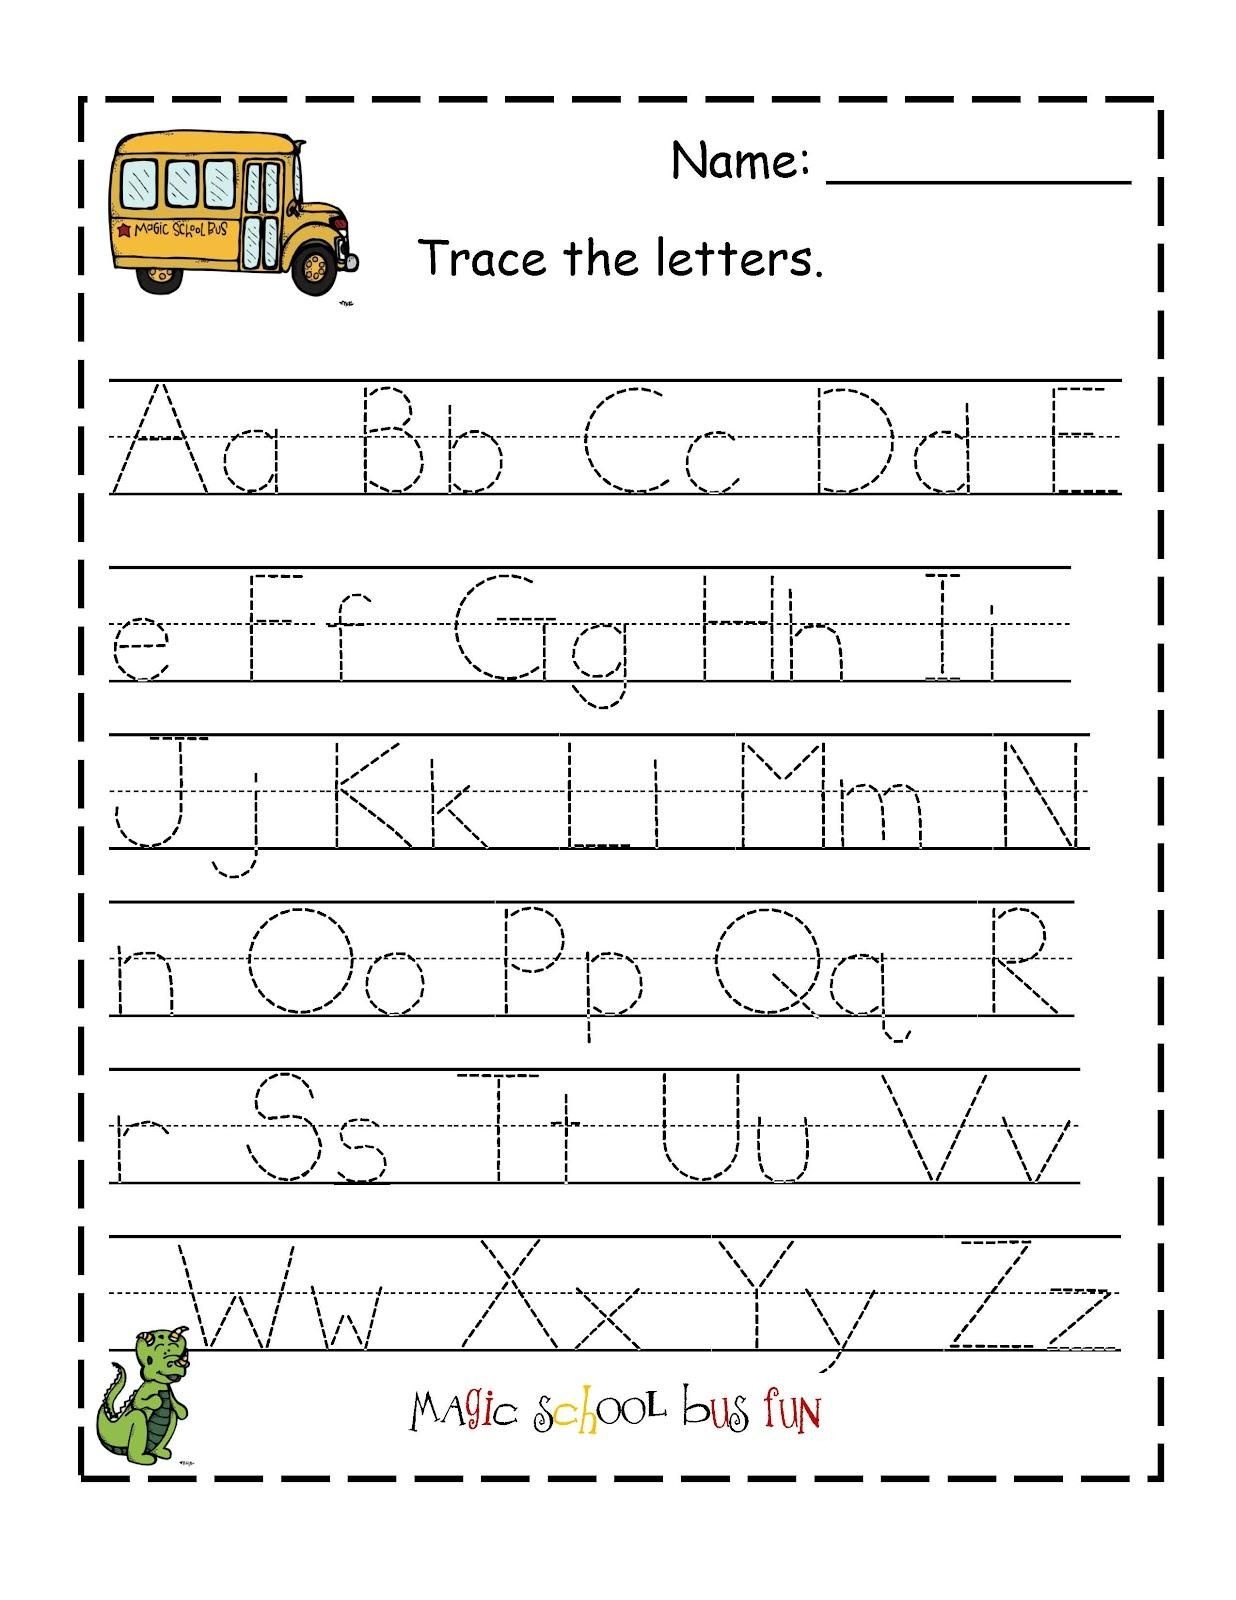 Free Printable Abc Tracing Worksheets #2 | Places To Visit - Free Printable Tracing Worksheets